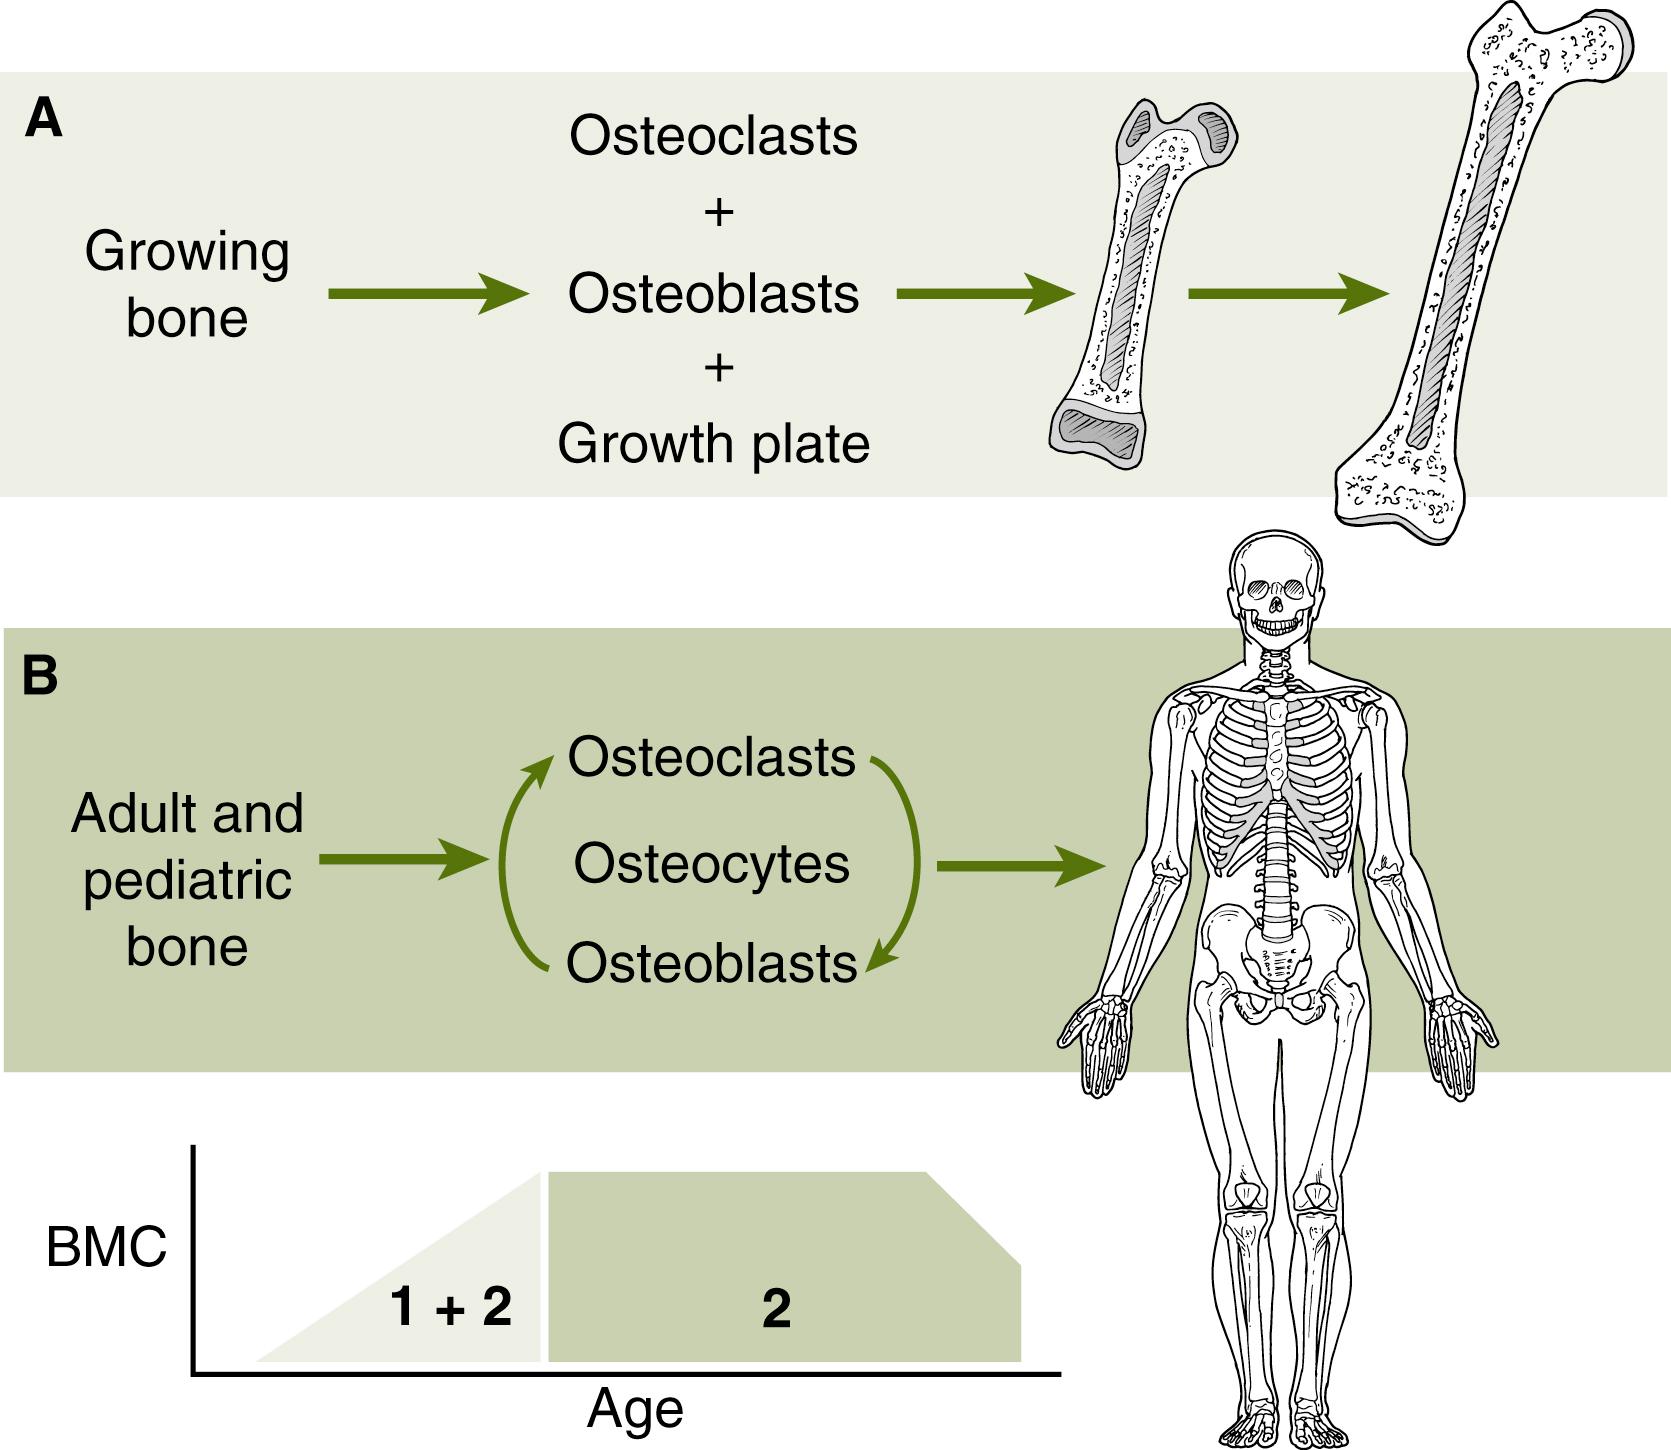 Fig. 91.1, Differences in skeletal development between adults and children. (A) Bone modeling: In children, the activity of the growth plate is responsible for longitudinal growth. Osteoblasts and osteoclasts act on different bone surfaces at the same time to produce periosteal apposition of bone, enlargement of the bone marrow cavity, and reshaping of metaphyses in long bones. (B) Bone remodeling: This process occurs in both adults and children. In response to bone senescence, microdamage or mechanical forces, osteoclasts resorb bone, and osteoblasts then repair bone by laying down new bone matrix. Osteocytes direct bone remodeling. Lower Panel : Peak bone mass is achieved in the early part of the third decade of life. After a period of stability, bone mass is lost over time.